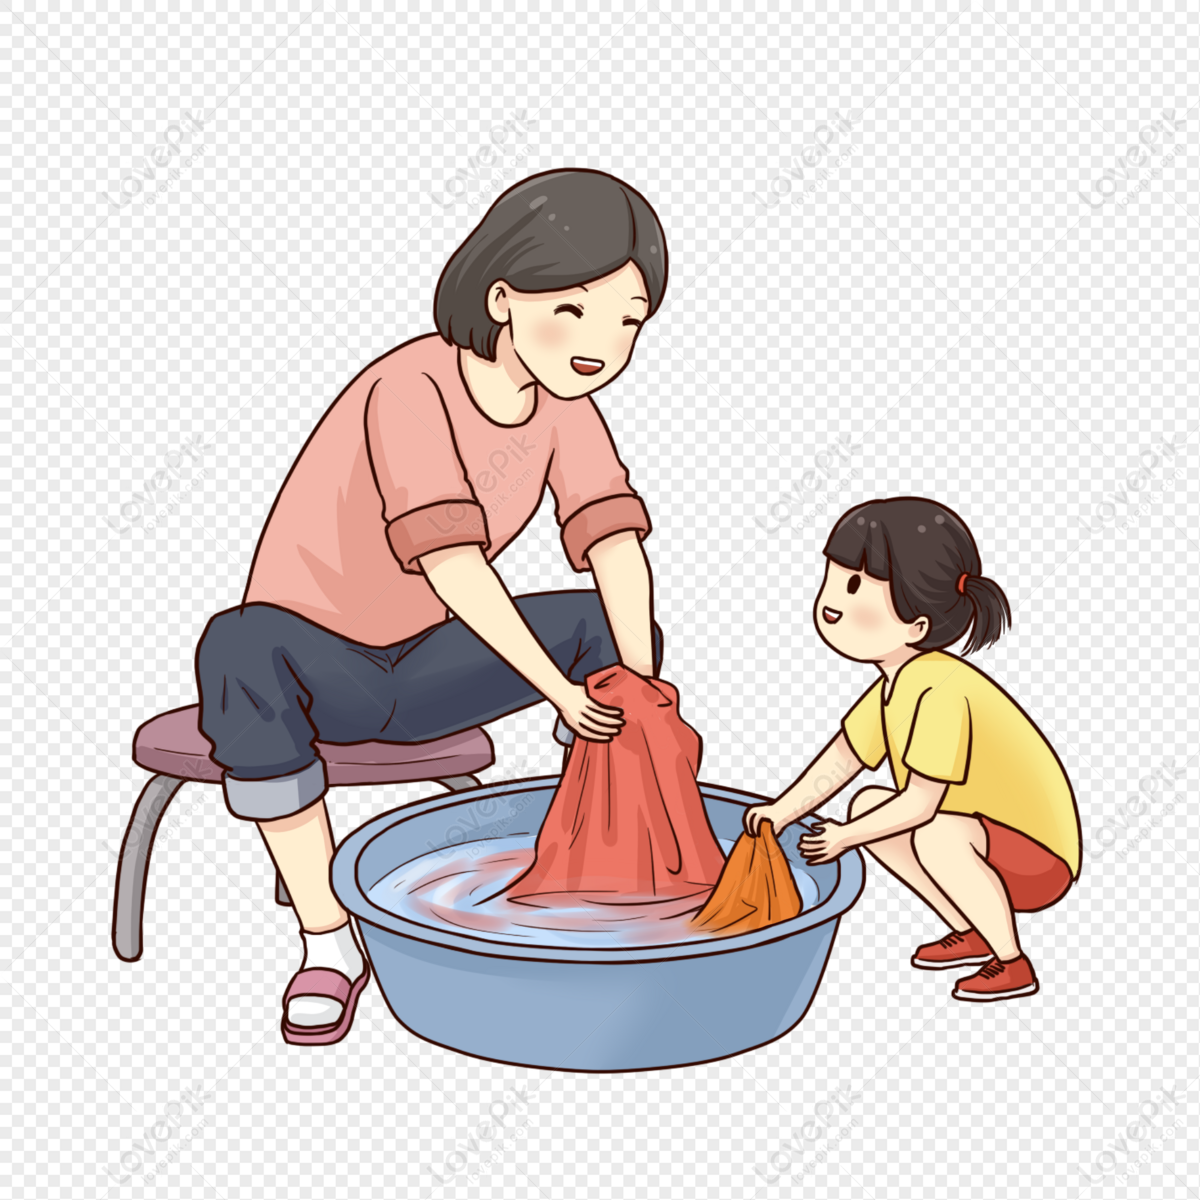 Helping My Mother Wash Clothes PNG Transparent And Clipart Image For Free  Download - Lovepik | 401179646